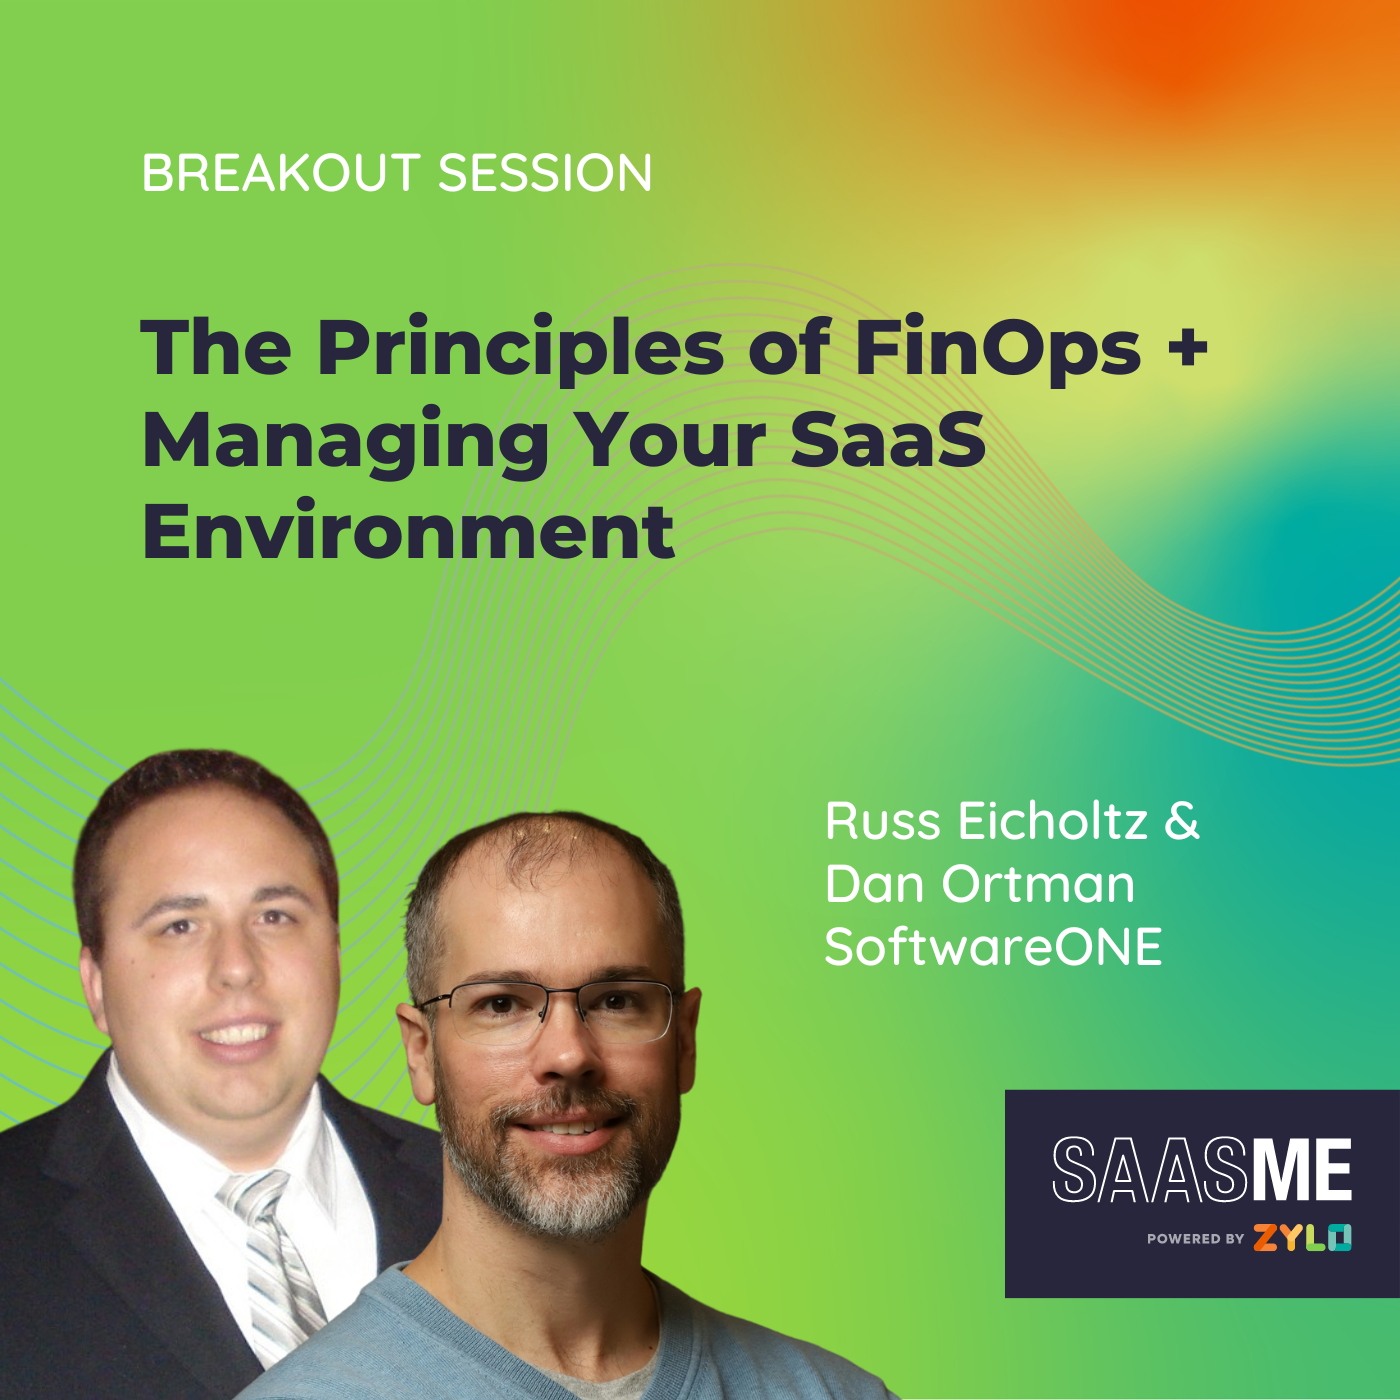 The Principles of FinOps + Managing Your SaaS Environment